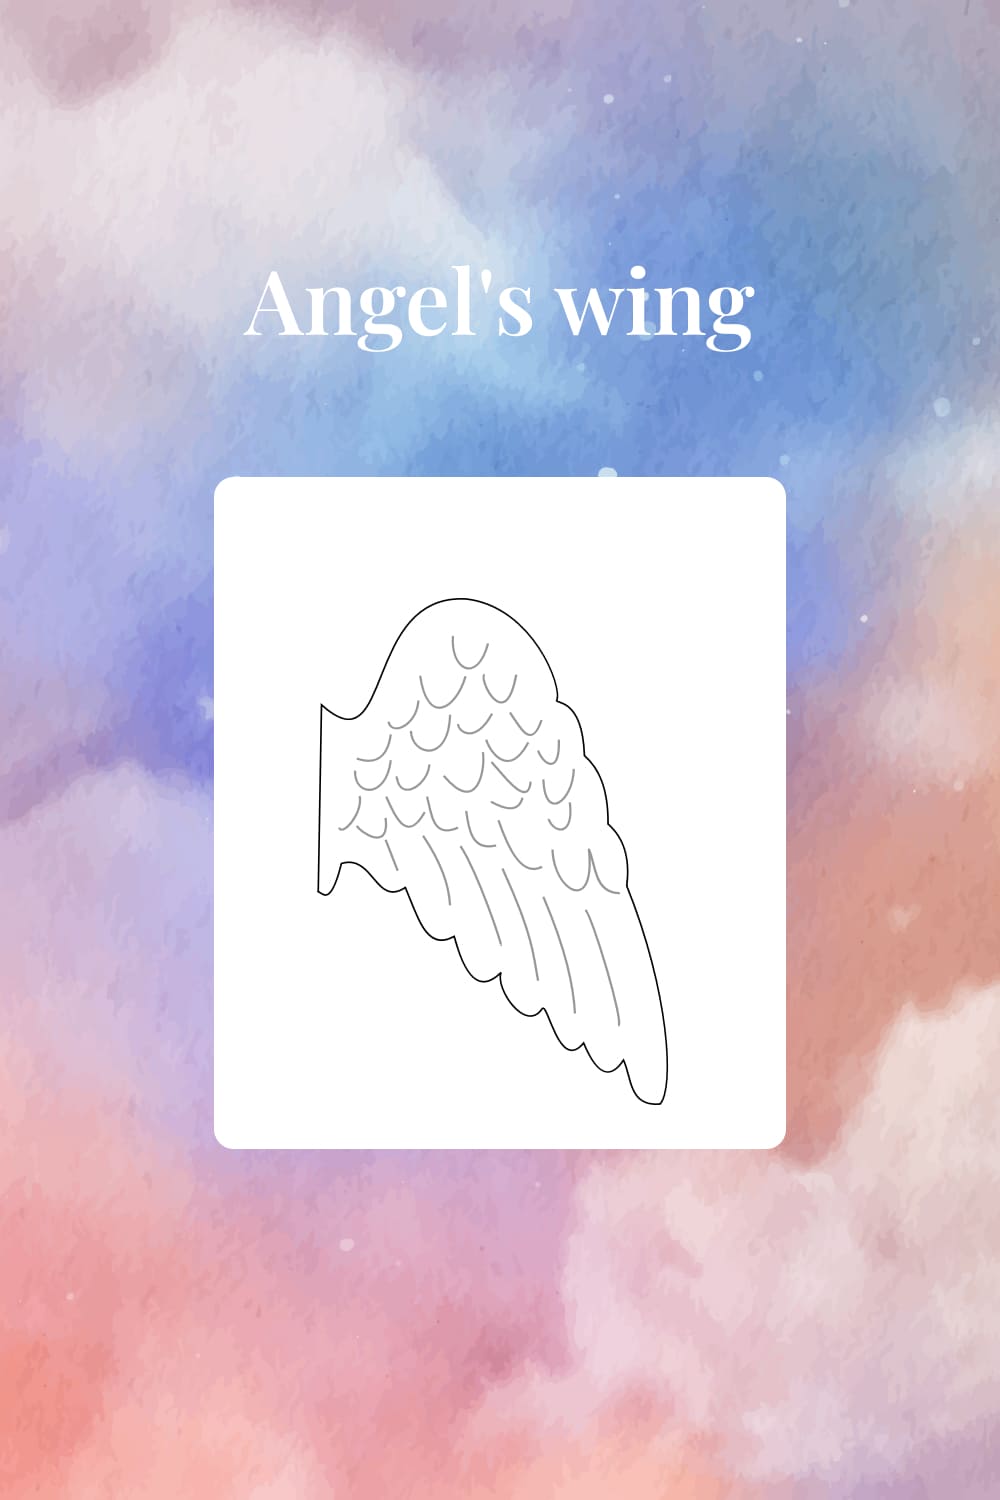 Image of a single angel wing in a minimalist style.